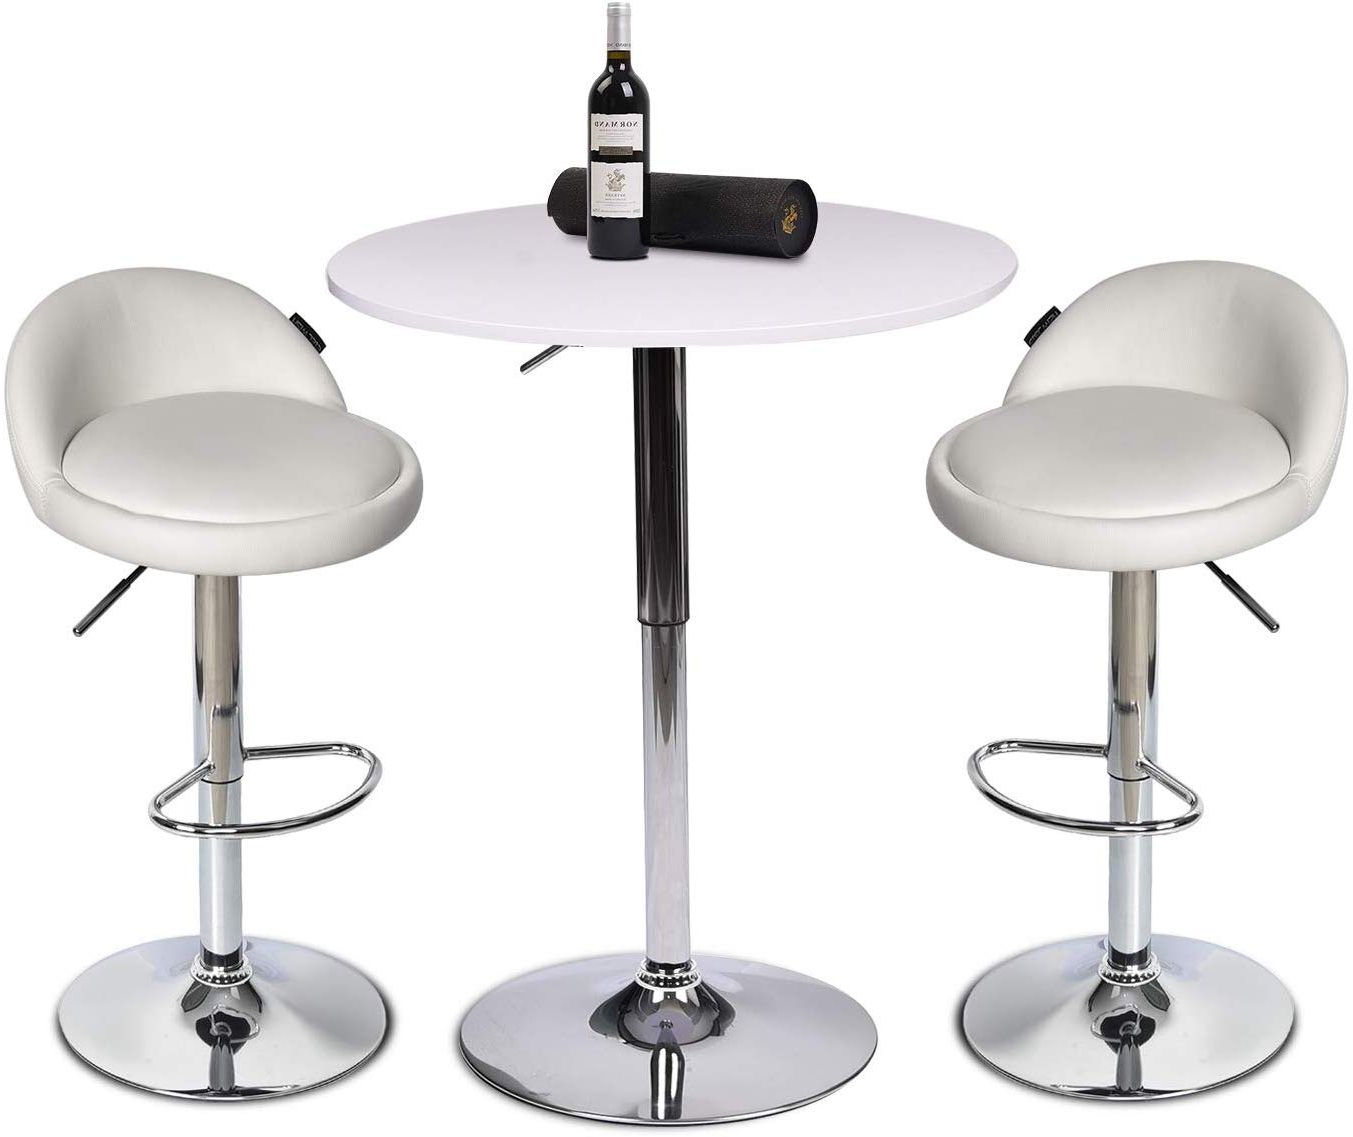 White Outdoor Cocktail Table And Chair Sets Pertaining To Current Elecwish Set Of 3 White Bar Table With 2 White Contemporary Chrome Air (View 9 of 15)